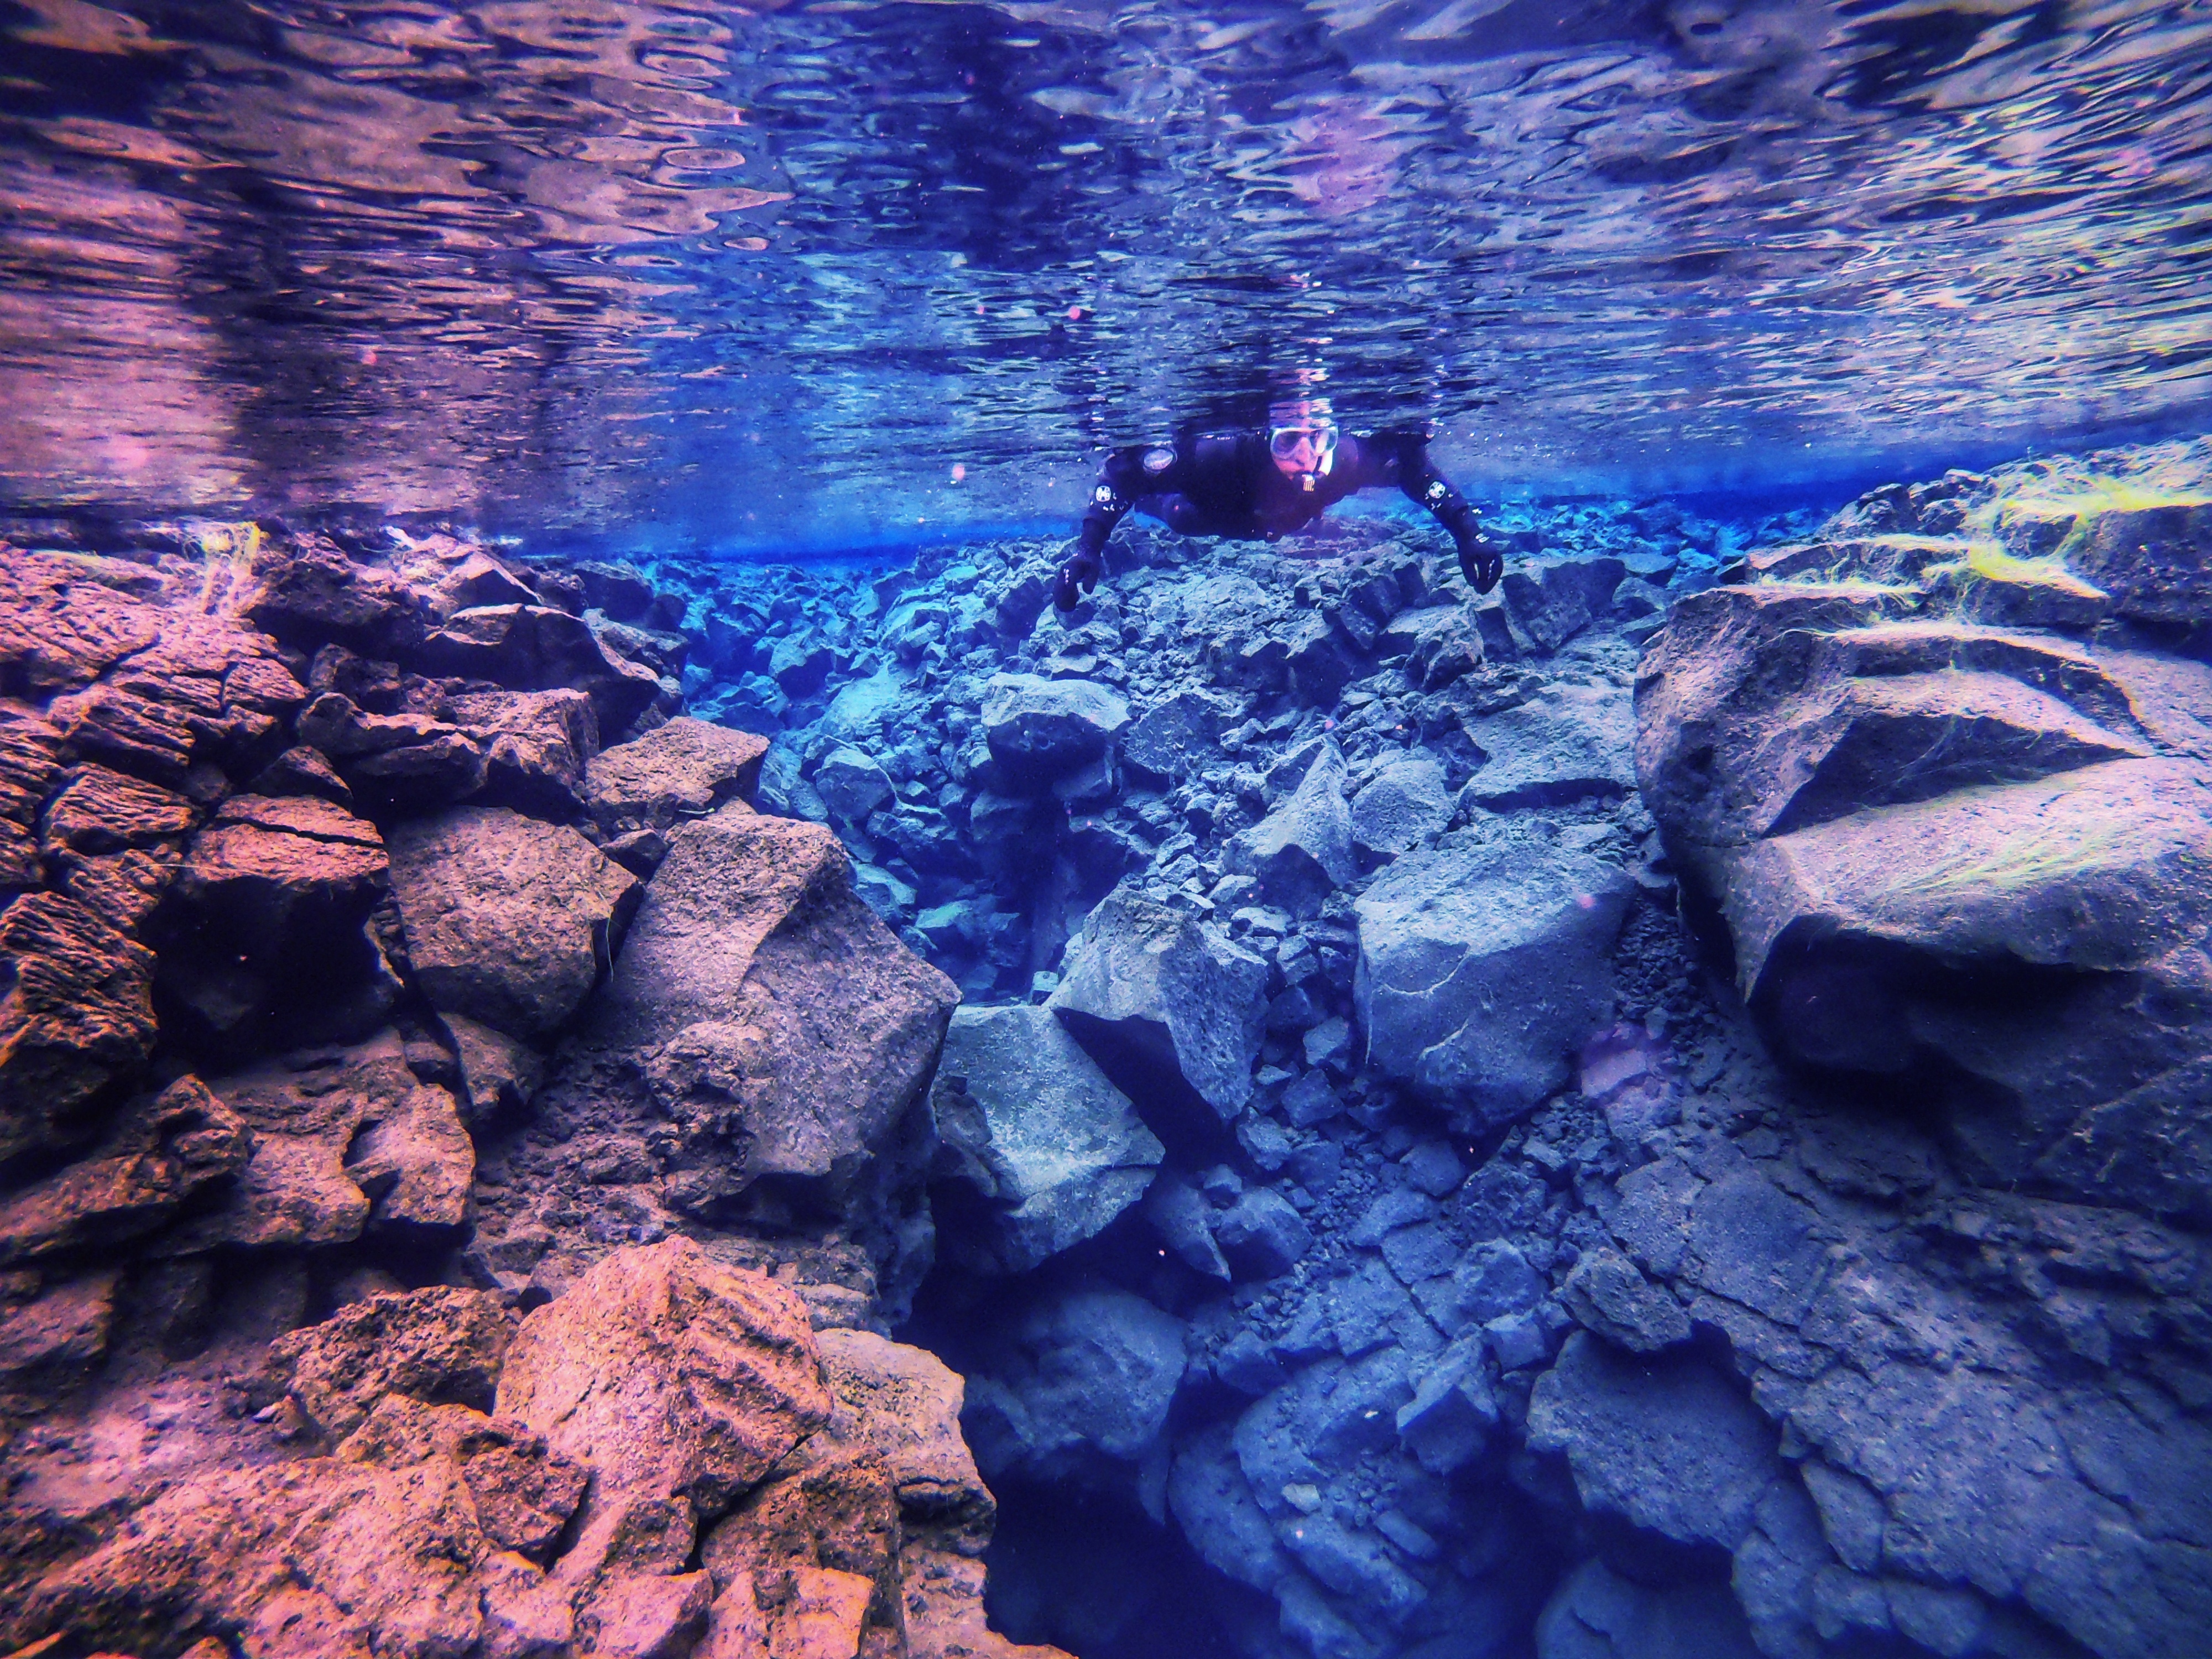 Bucket list day trips from Reykjavik, Iceland - Snorkeling the Silfra Fissure